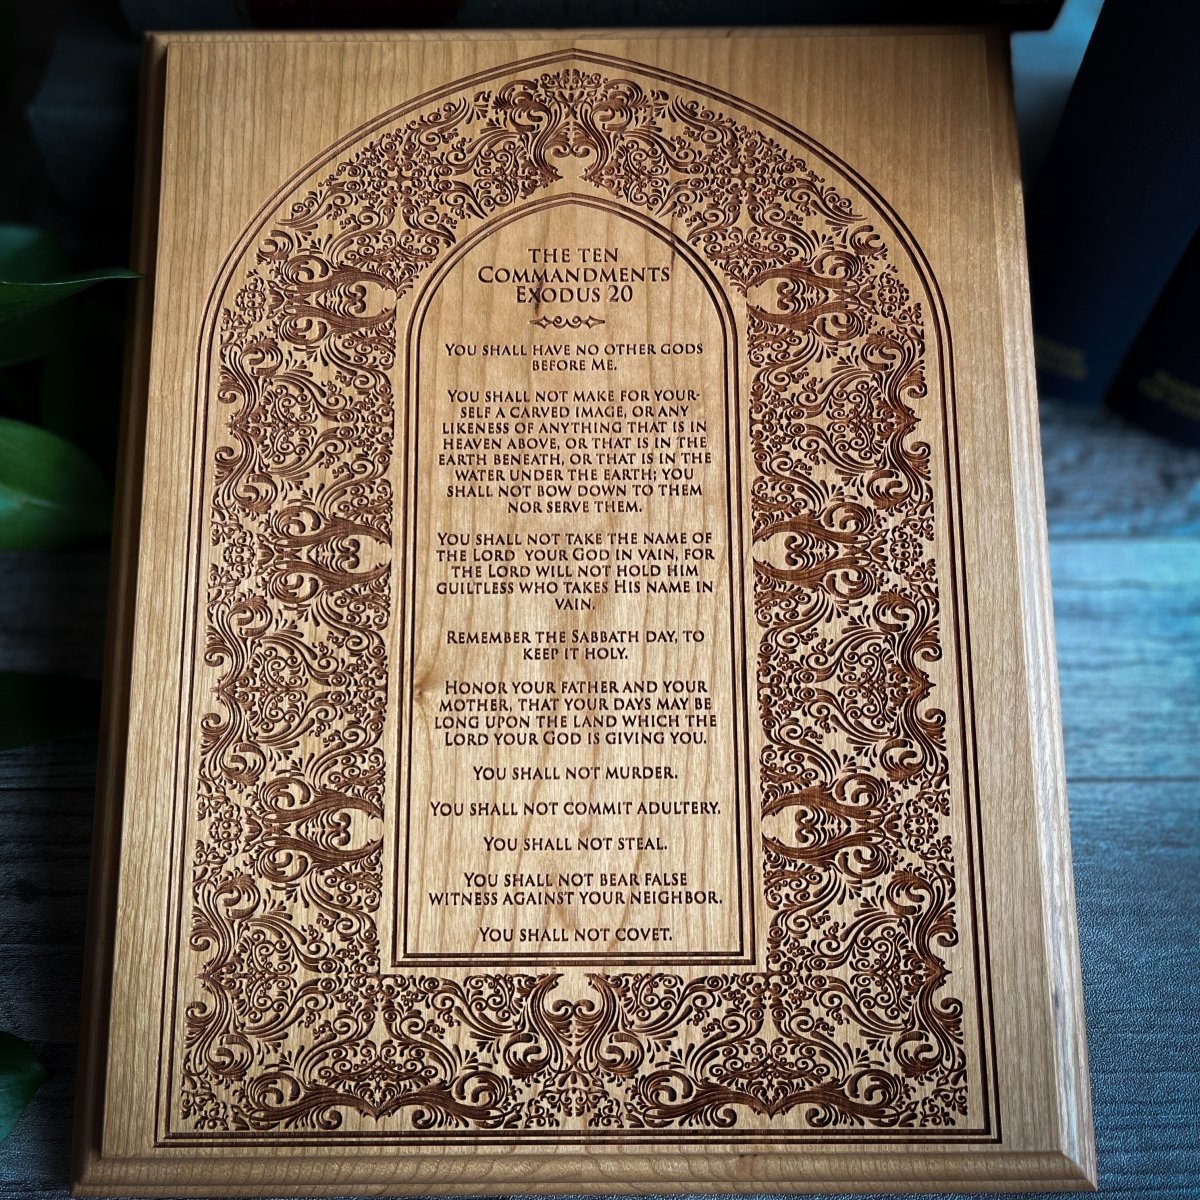 Engravedwood - The Ten Commandments - Engraved Wood Art - The Reformed Sage - #reformed# - #reformed_gifts# - #christian_gifts#